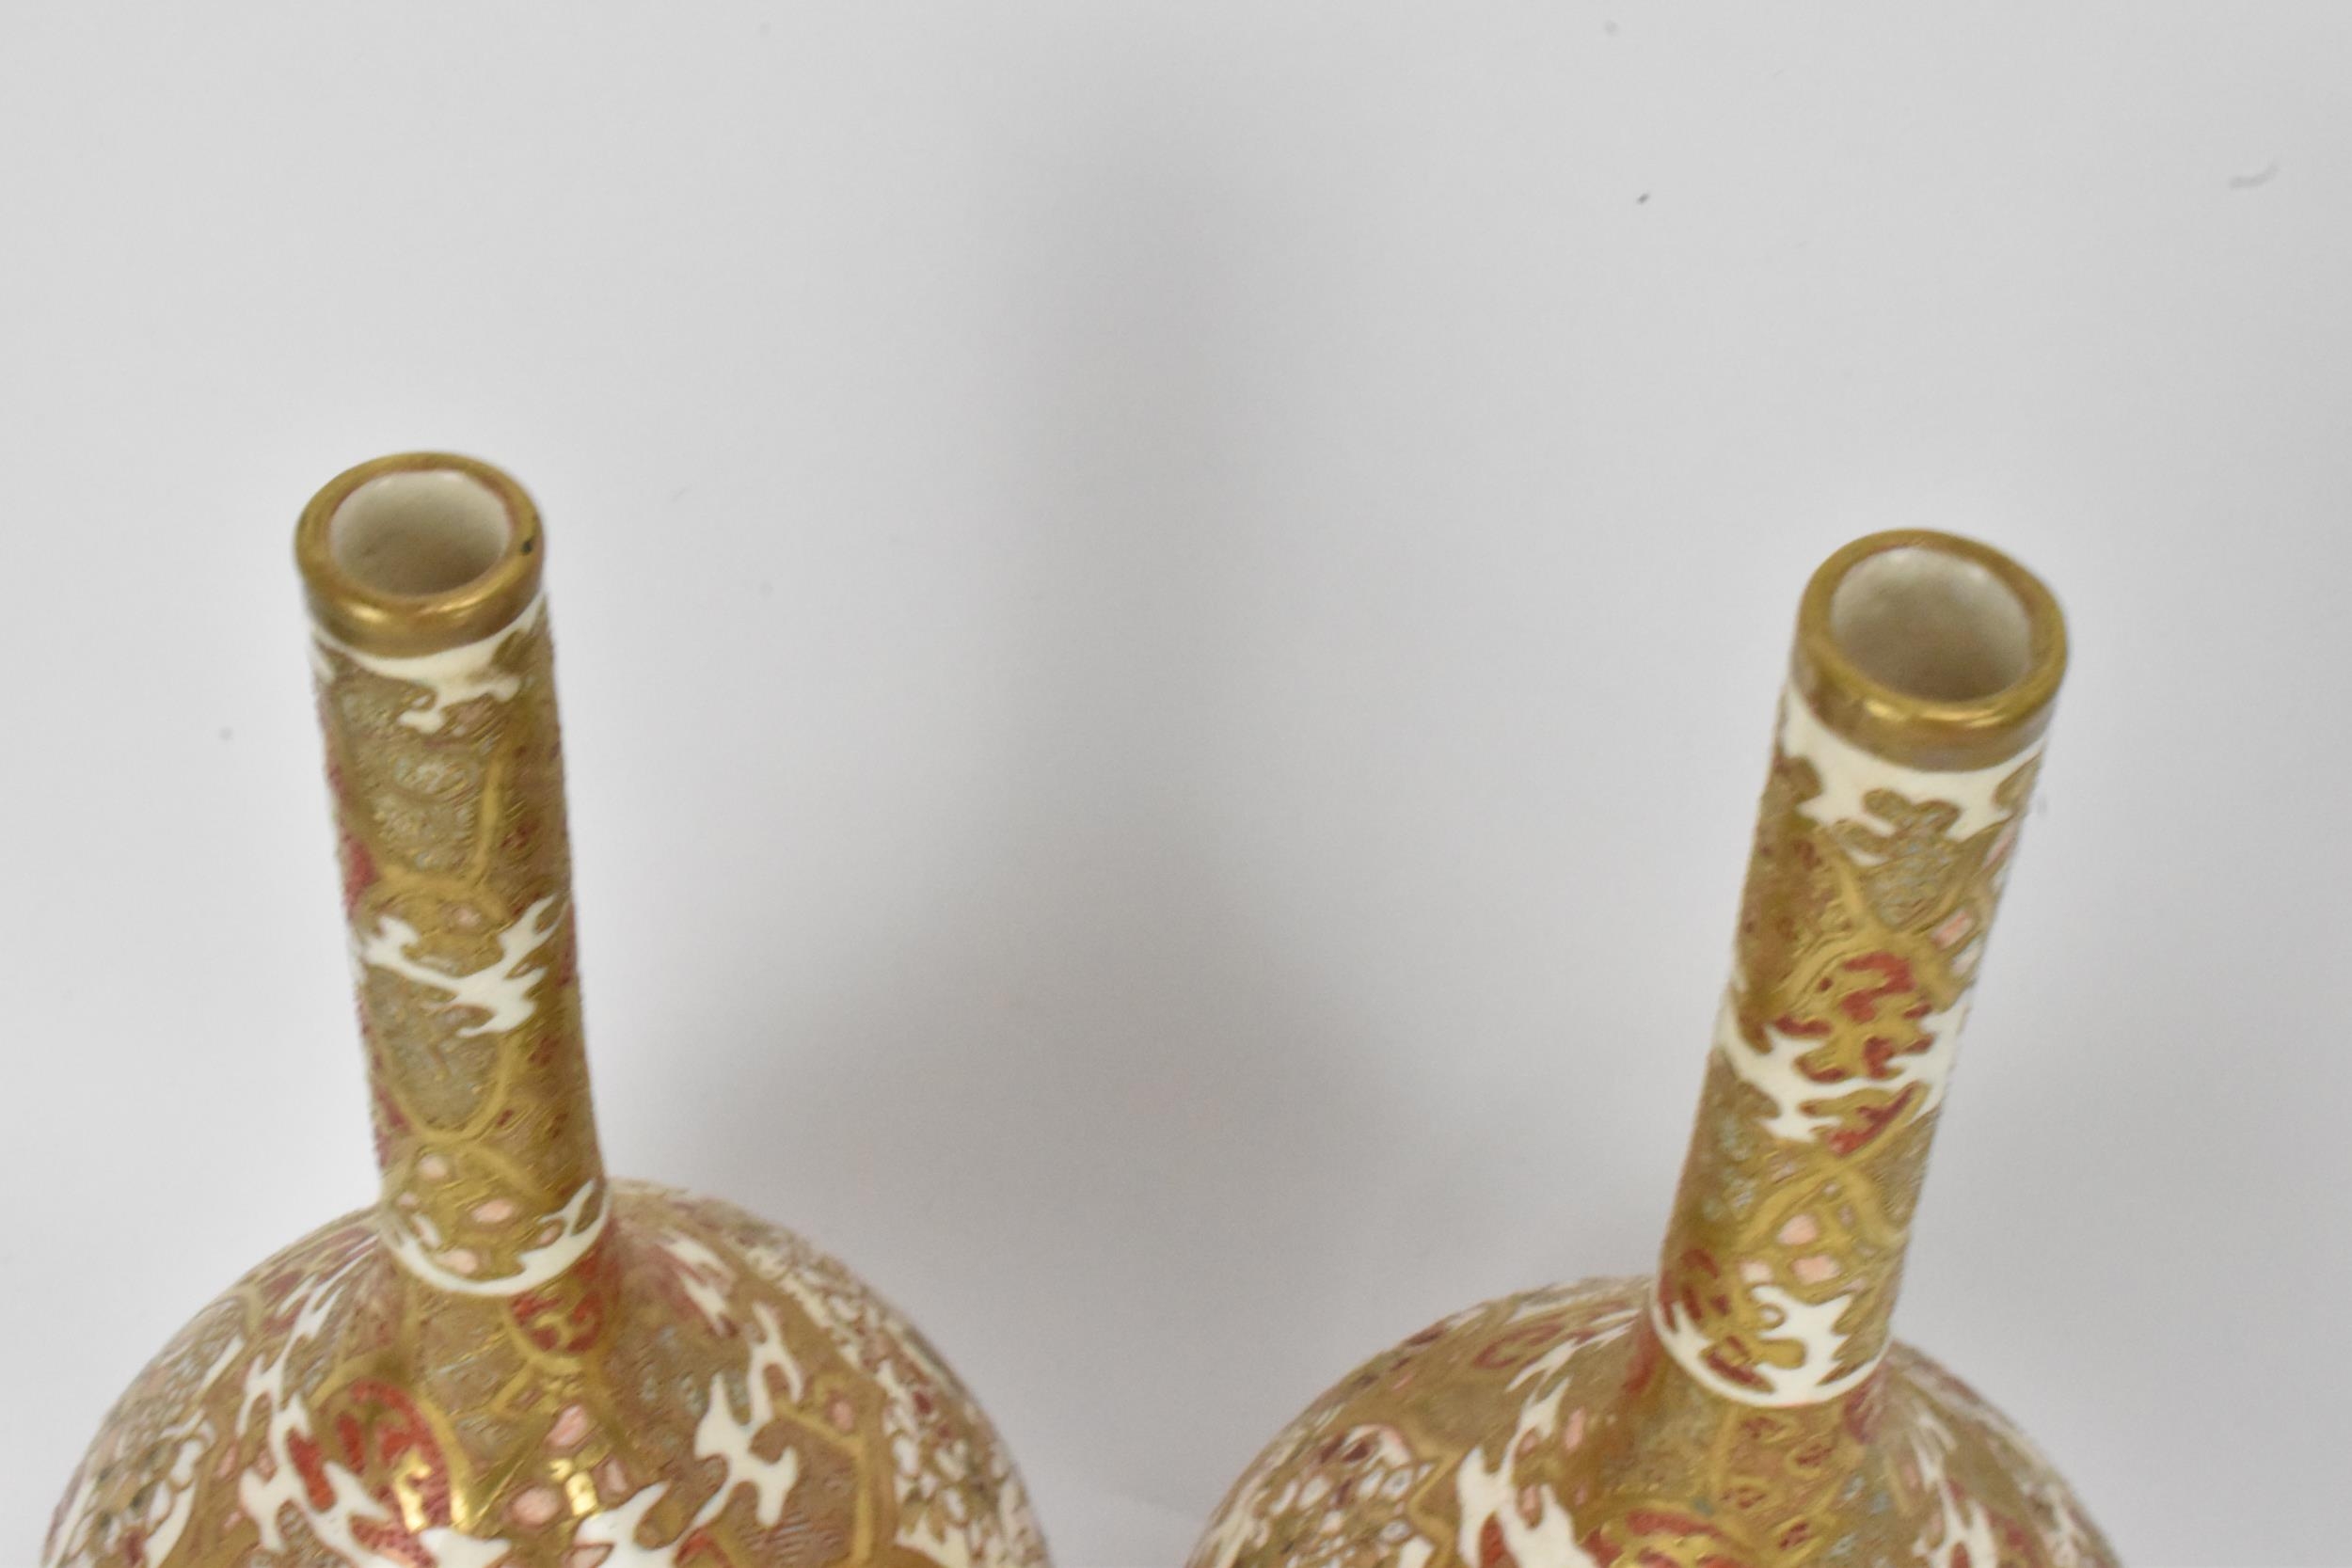 A pair of Japanese Meiji period satsuma bottle neck vases, of onion shape with shaped cartouches - Image 5 of 6